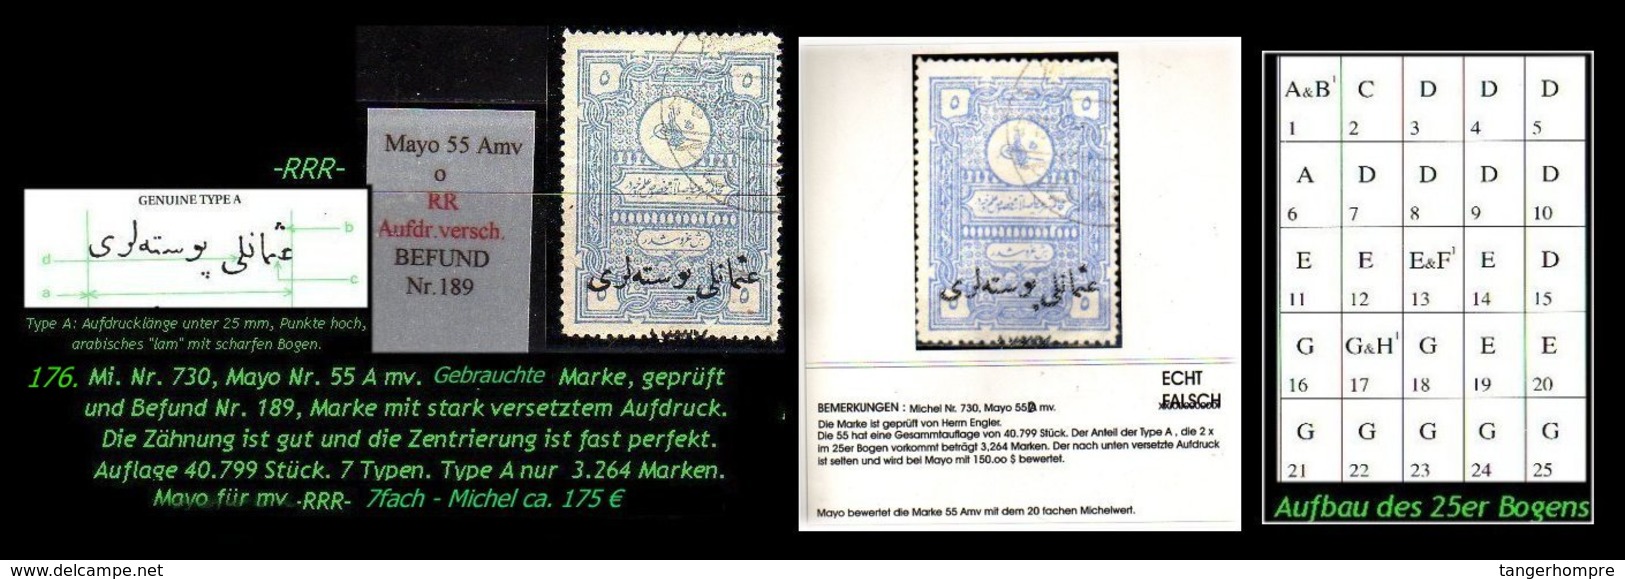 EARLY OTTOMAN SPECIALIZED FOR SPECIALIST, SEE...Mi. Nr. 730 - Mayo 55 A - Auflagenanteil 3.264 Marken -R- - 1920-21 Anatolie